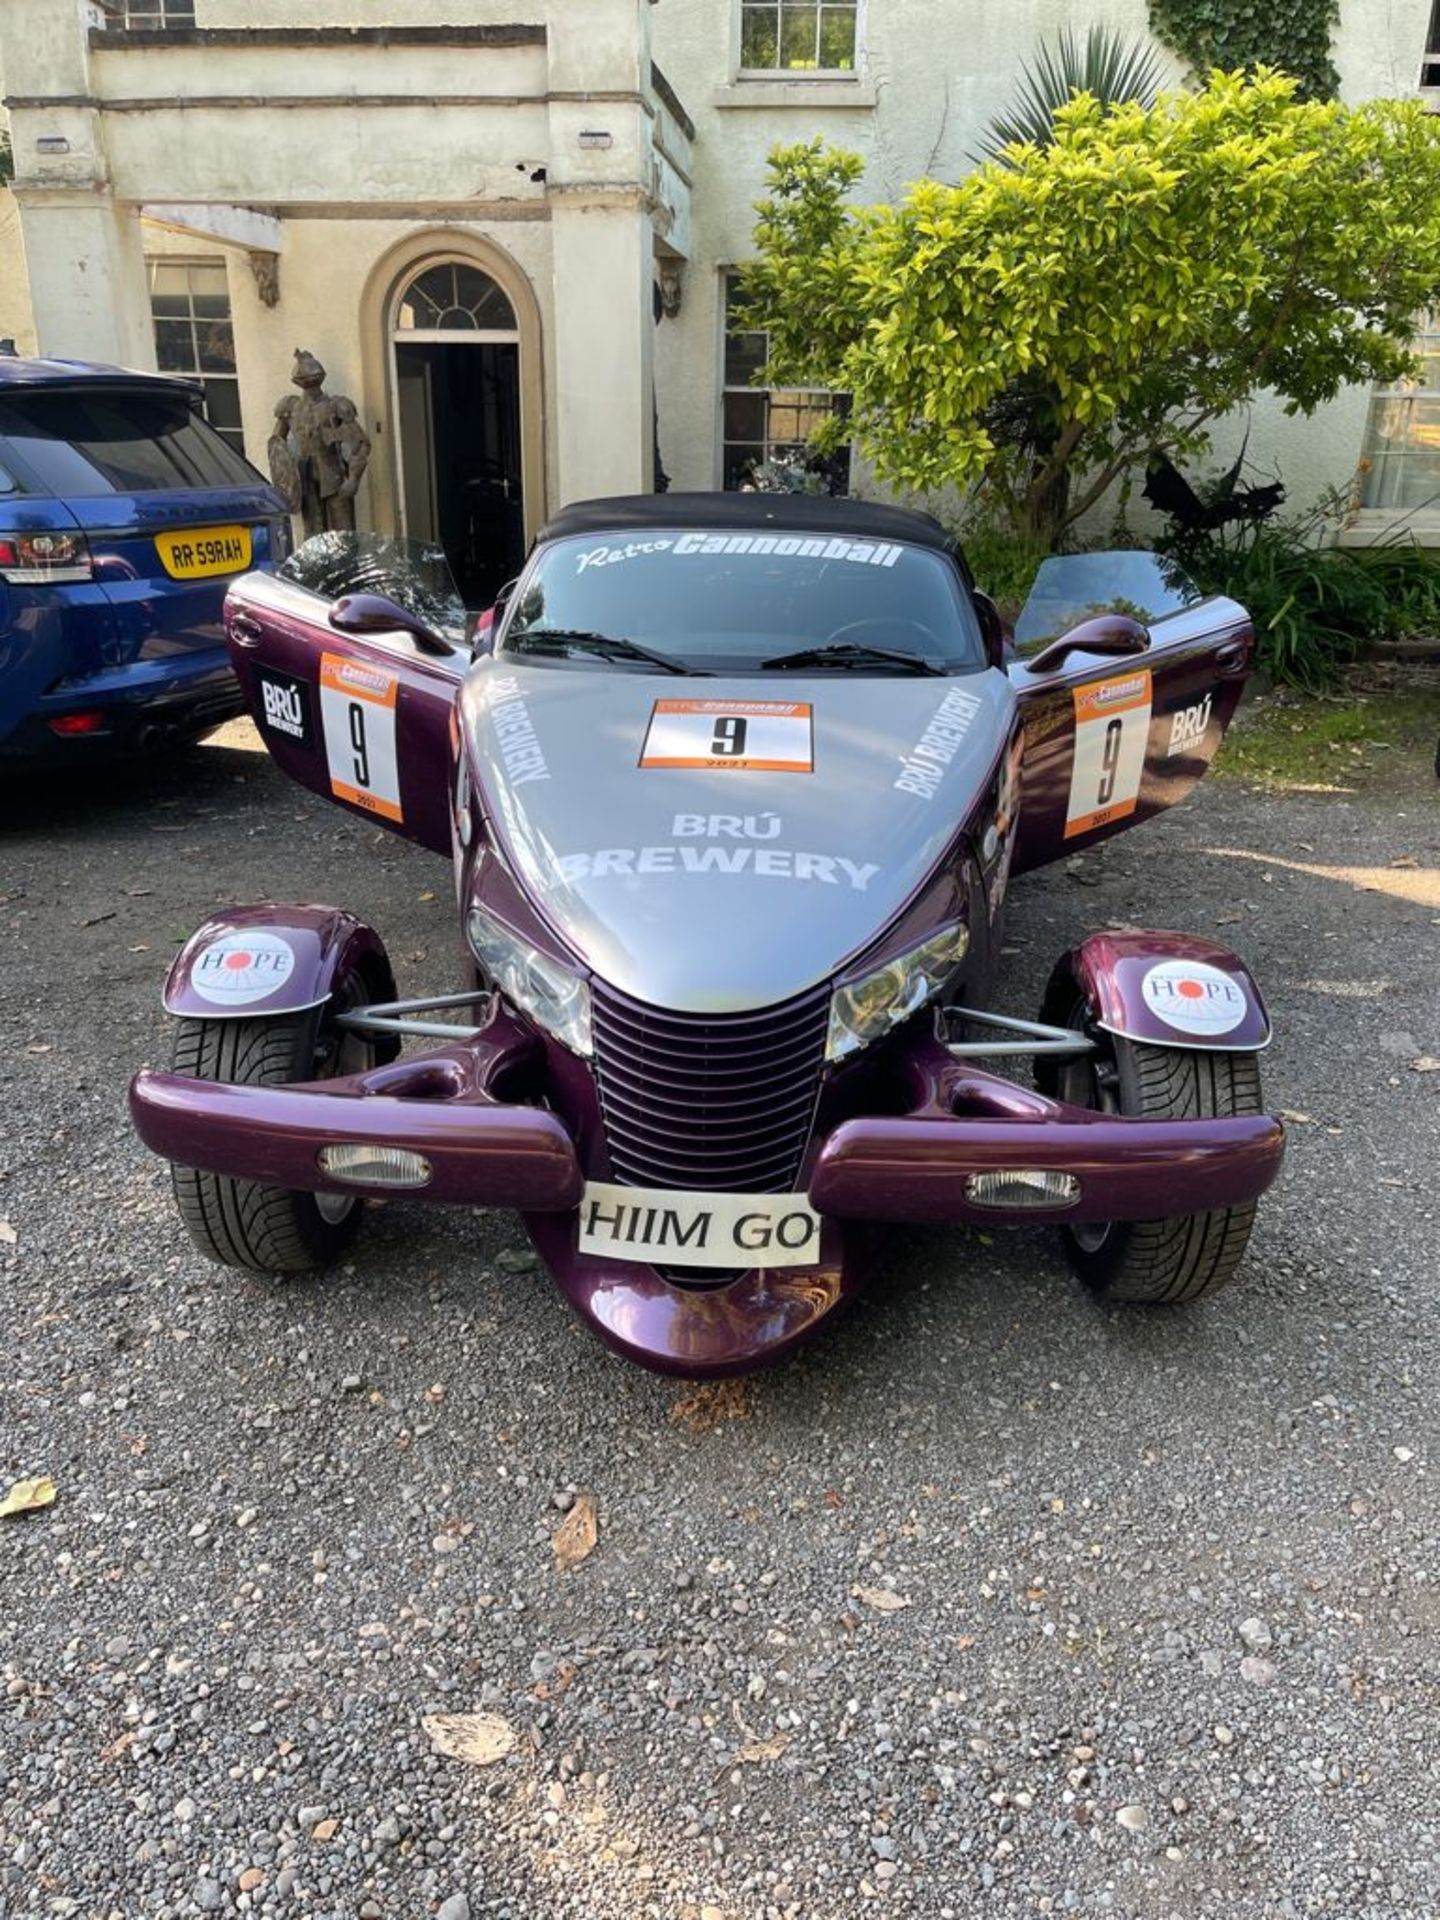 1998 CHRYSLER PLYMOUTH PROWLER V6 2 DOOR CONVERTIBLE, 3500cc PETROL ENGINE, AUTO *NO VAT* - Image 23 of 32